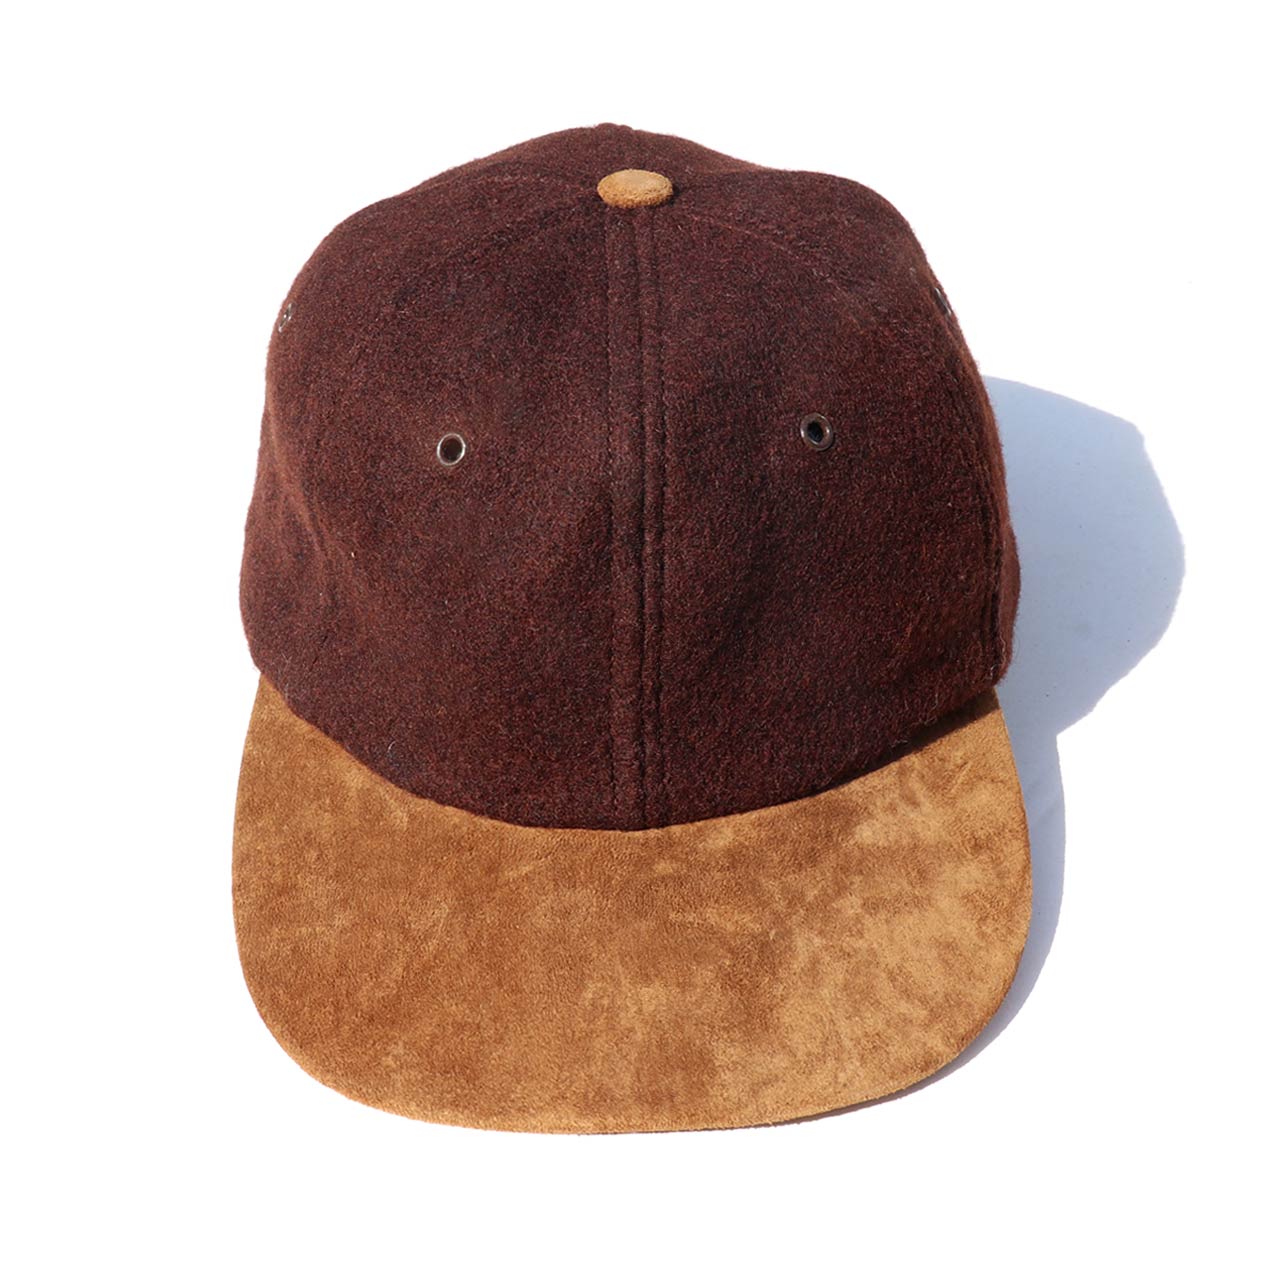 POST JUNK / 90's J.CREW Wool / Suede Leather Strapback Cap Made In 